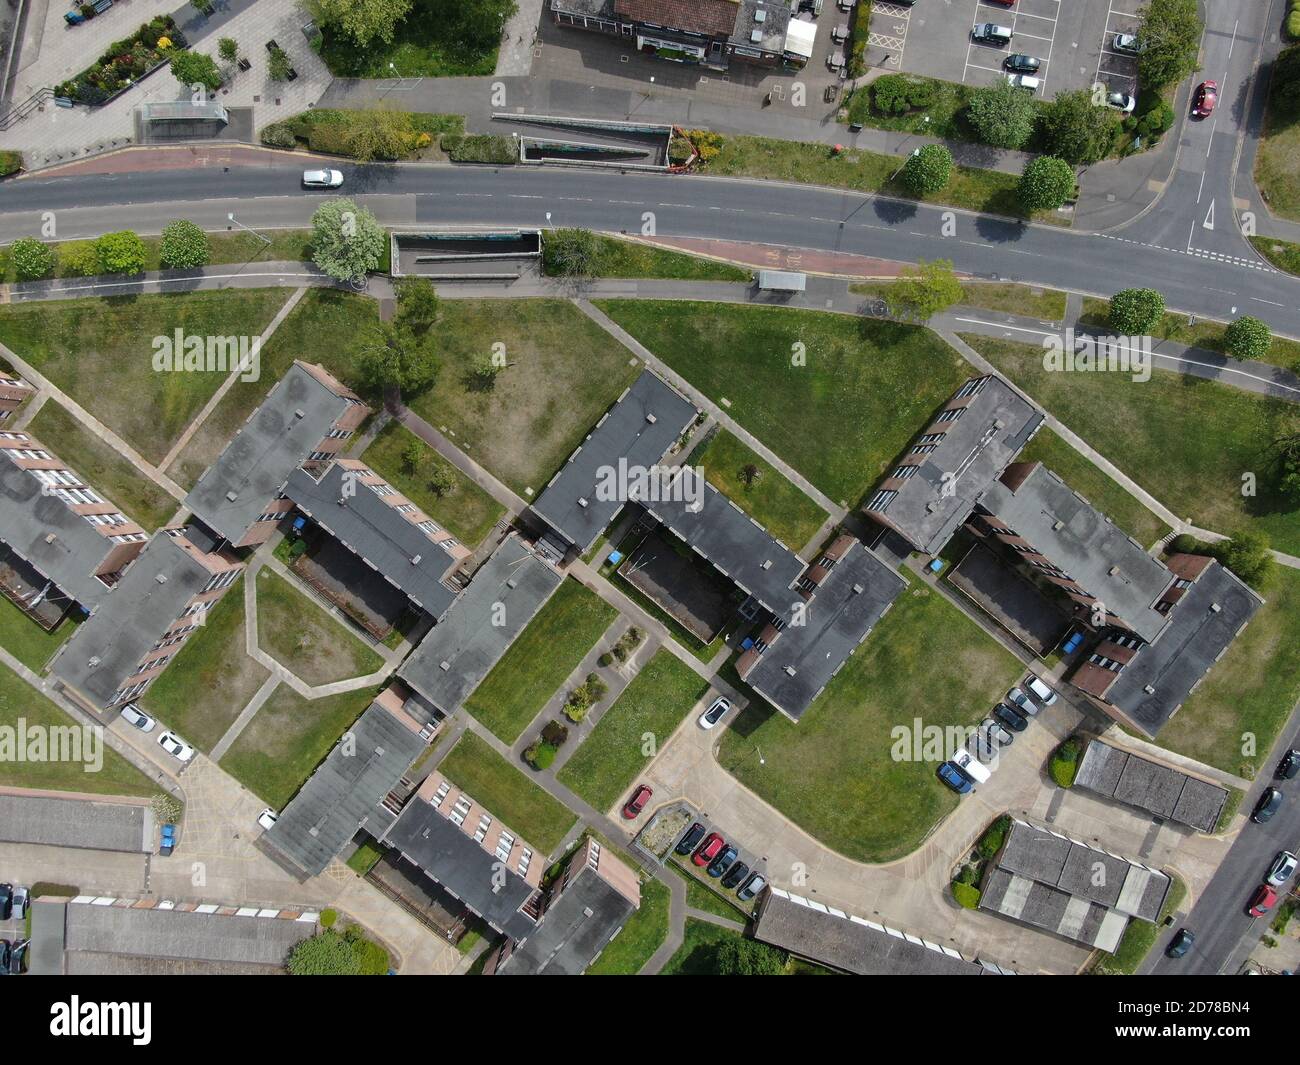 aerial view of H shaped flats and a road with bus stops  Stock Photo